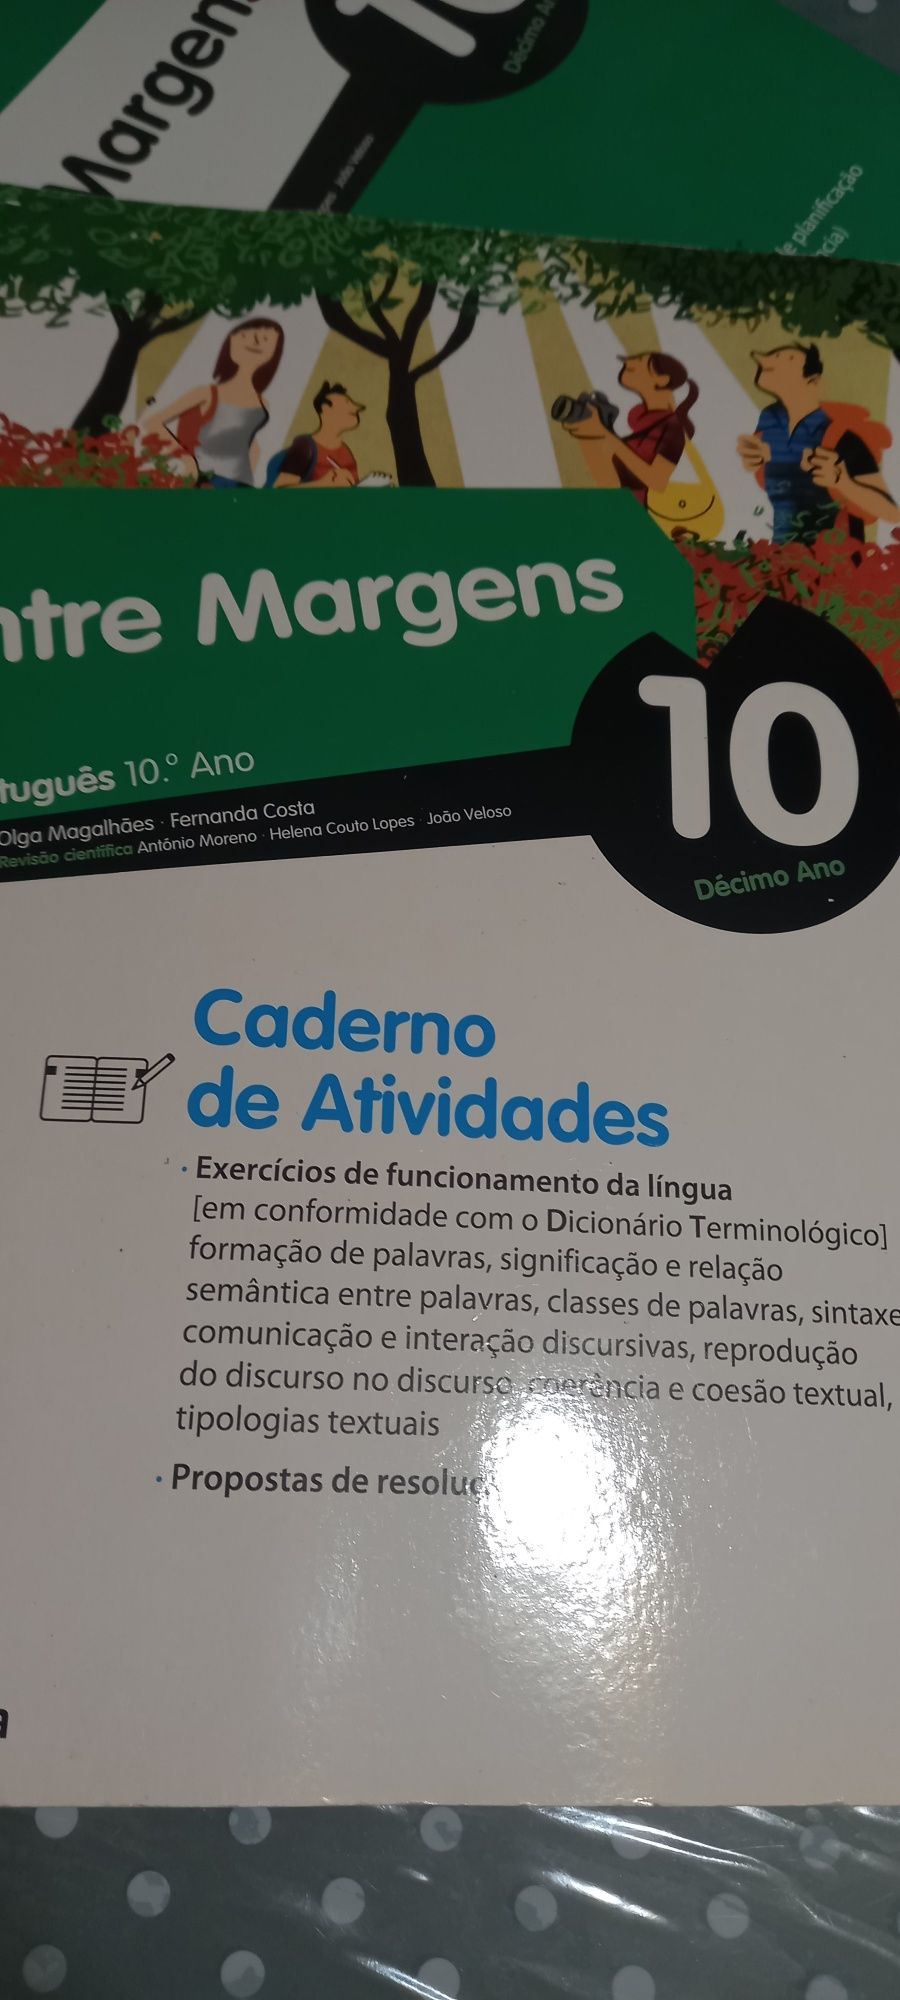 Entre Margens 10.°ano